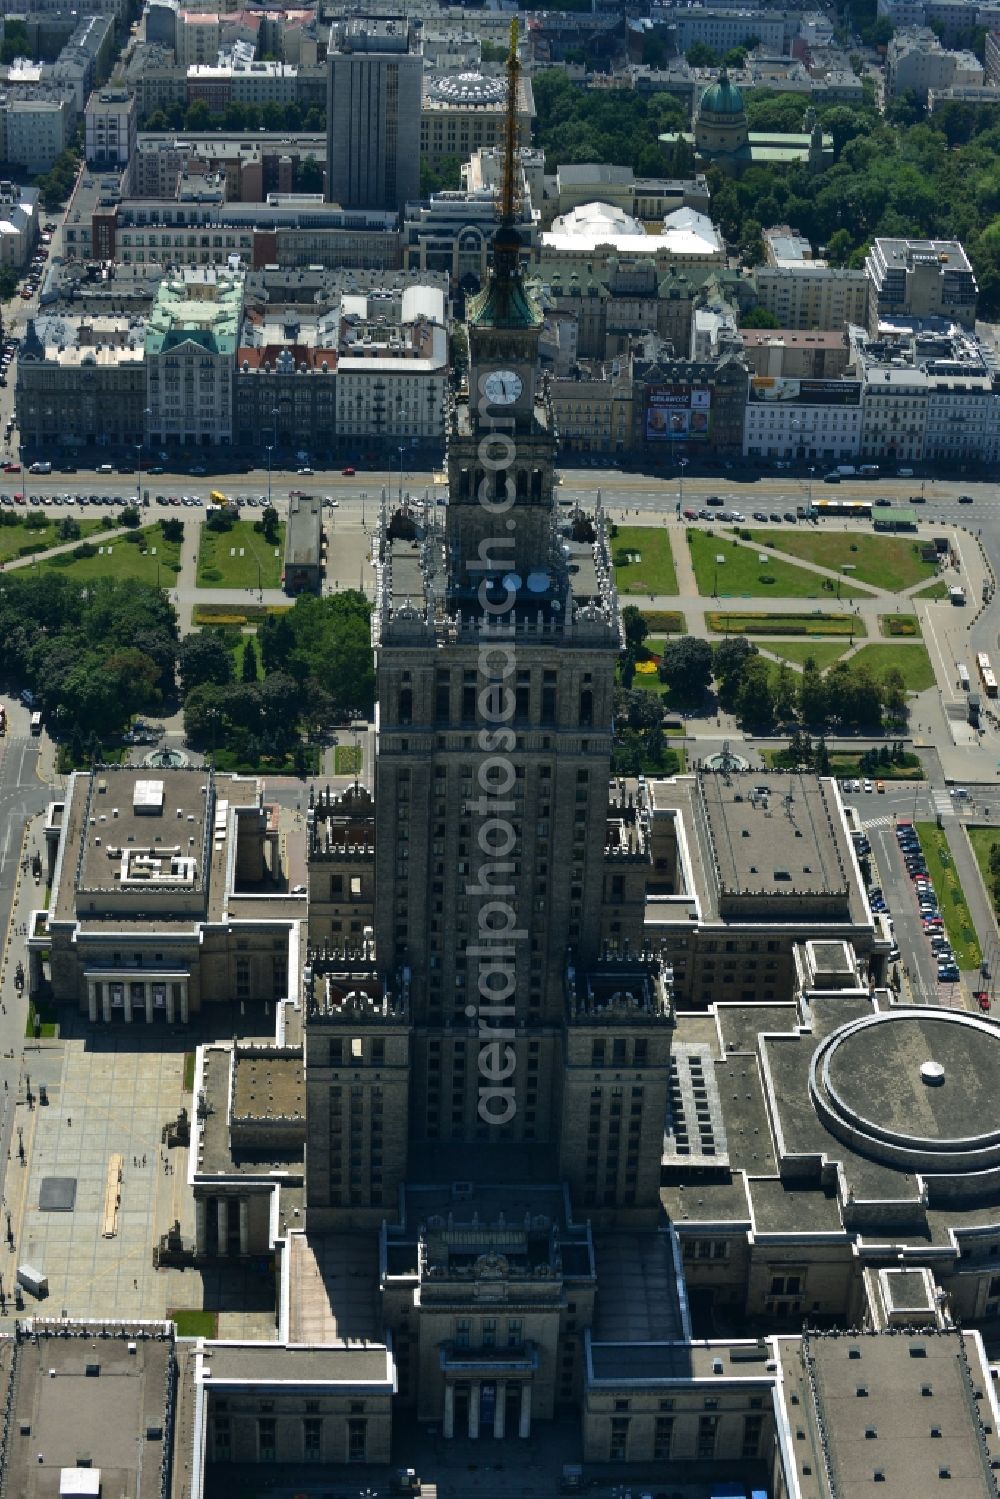 Aerial photograph Warschau - View on the landmark in the city center, the high-rise building complex of the Palace of Culture and Science (Palac Kultury i Nauki Polish) in Warsaw in Poland